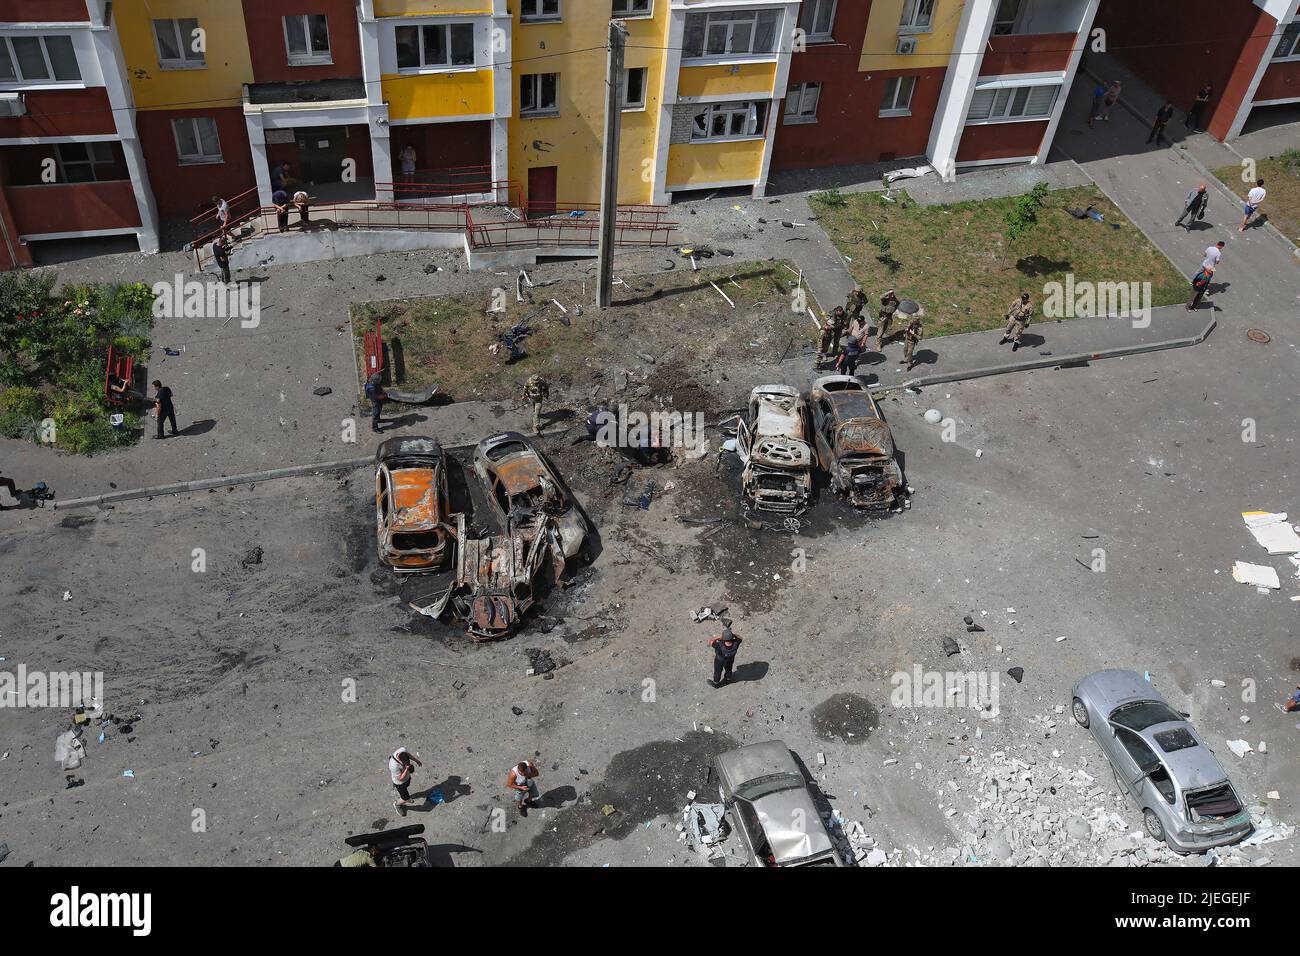 A crater is seen in the ground between burnt-out cars after the Russian troops attacked a northern neighbourhood with a BM-30 Smerch multiple rocket launcher, Kharkiv, northeastern Ukraine, June 26, 2022. Photo by Vyacheslav Madiyevskyy/Ukrinform/ABACAPRESS.COM Stock Photo